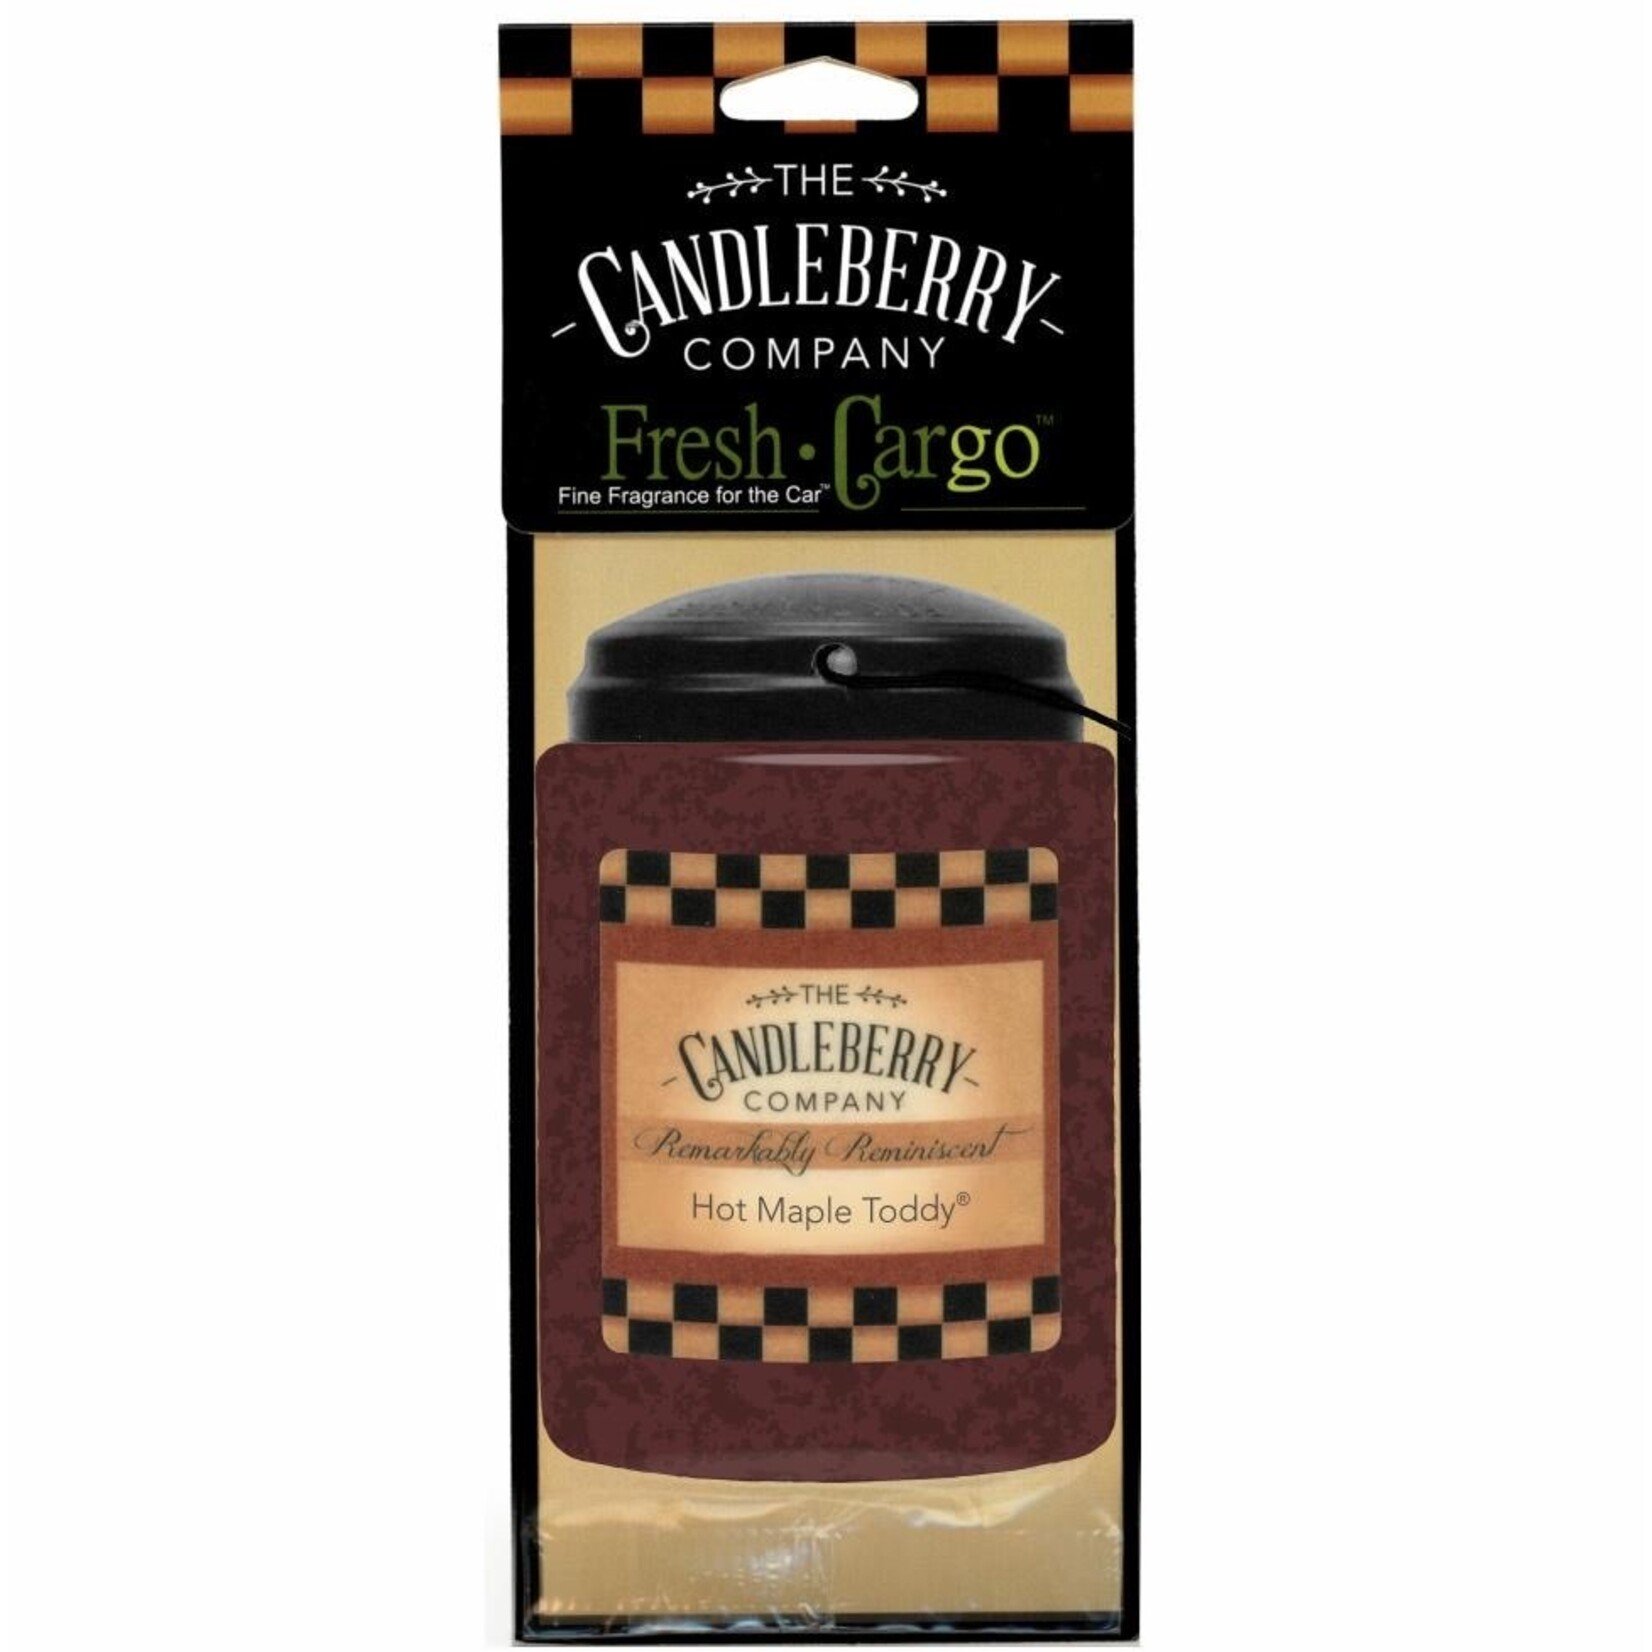 Candleberry Candleberry Hot Maple Toddy